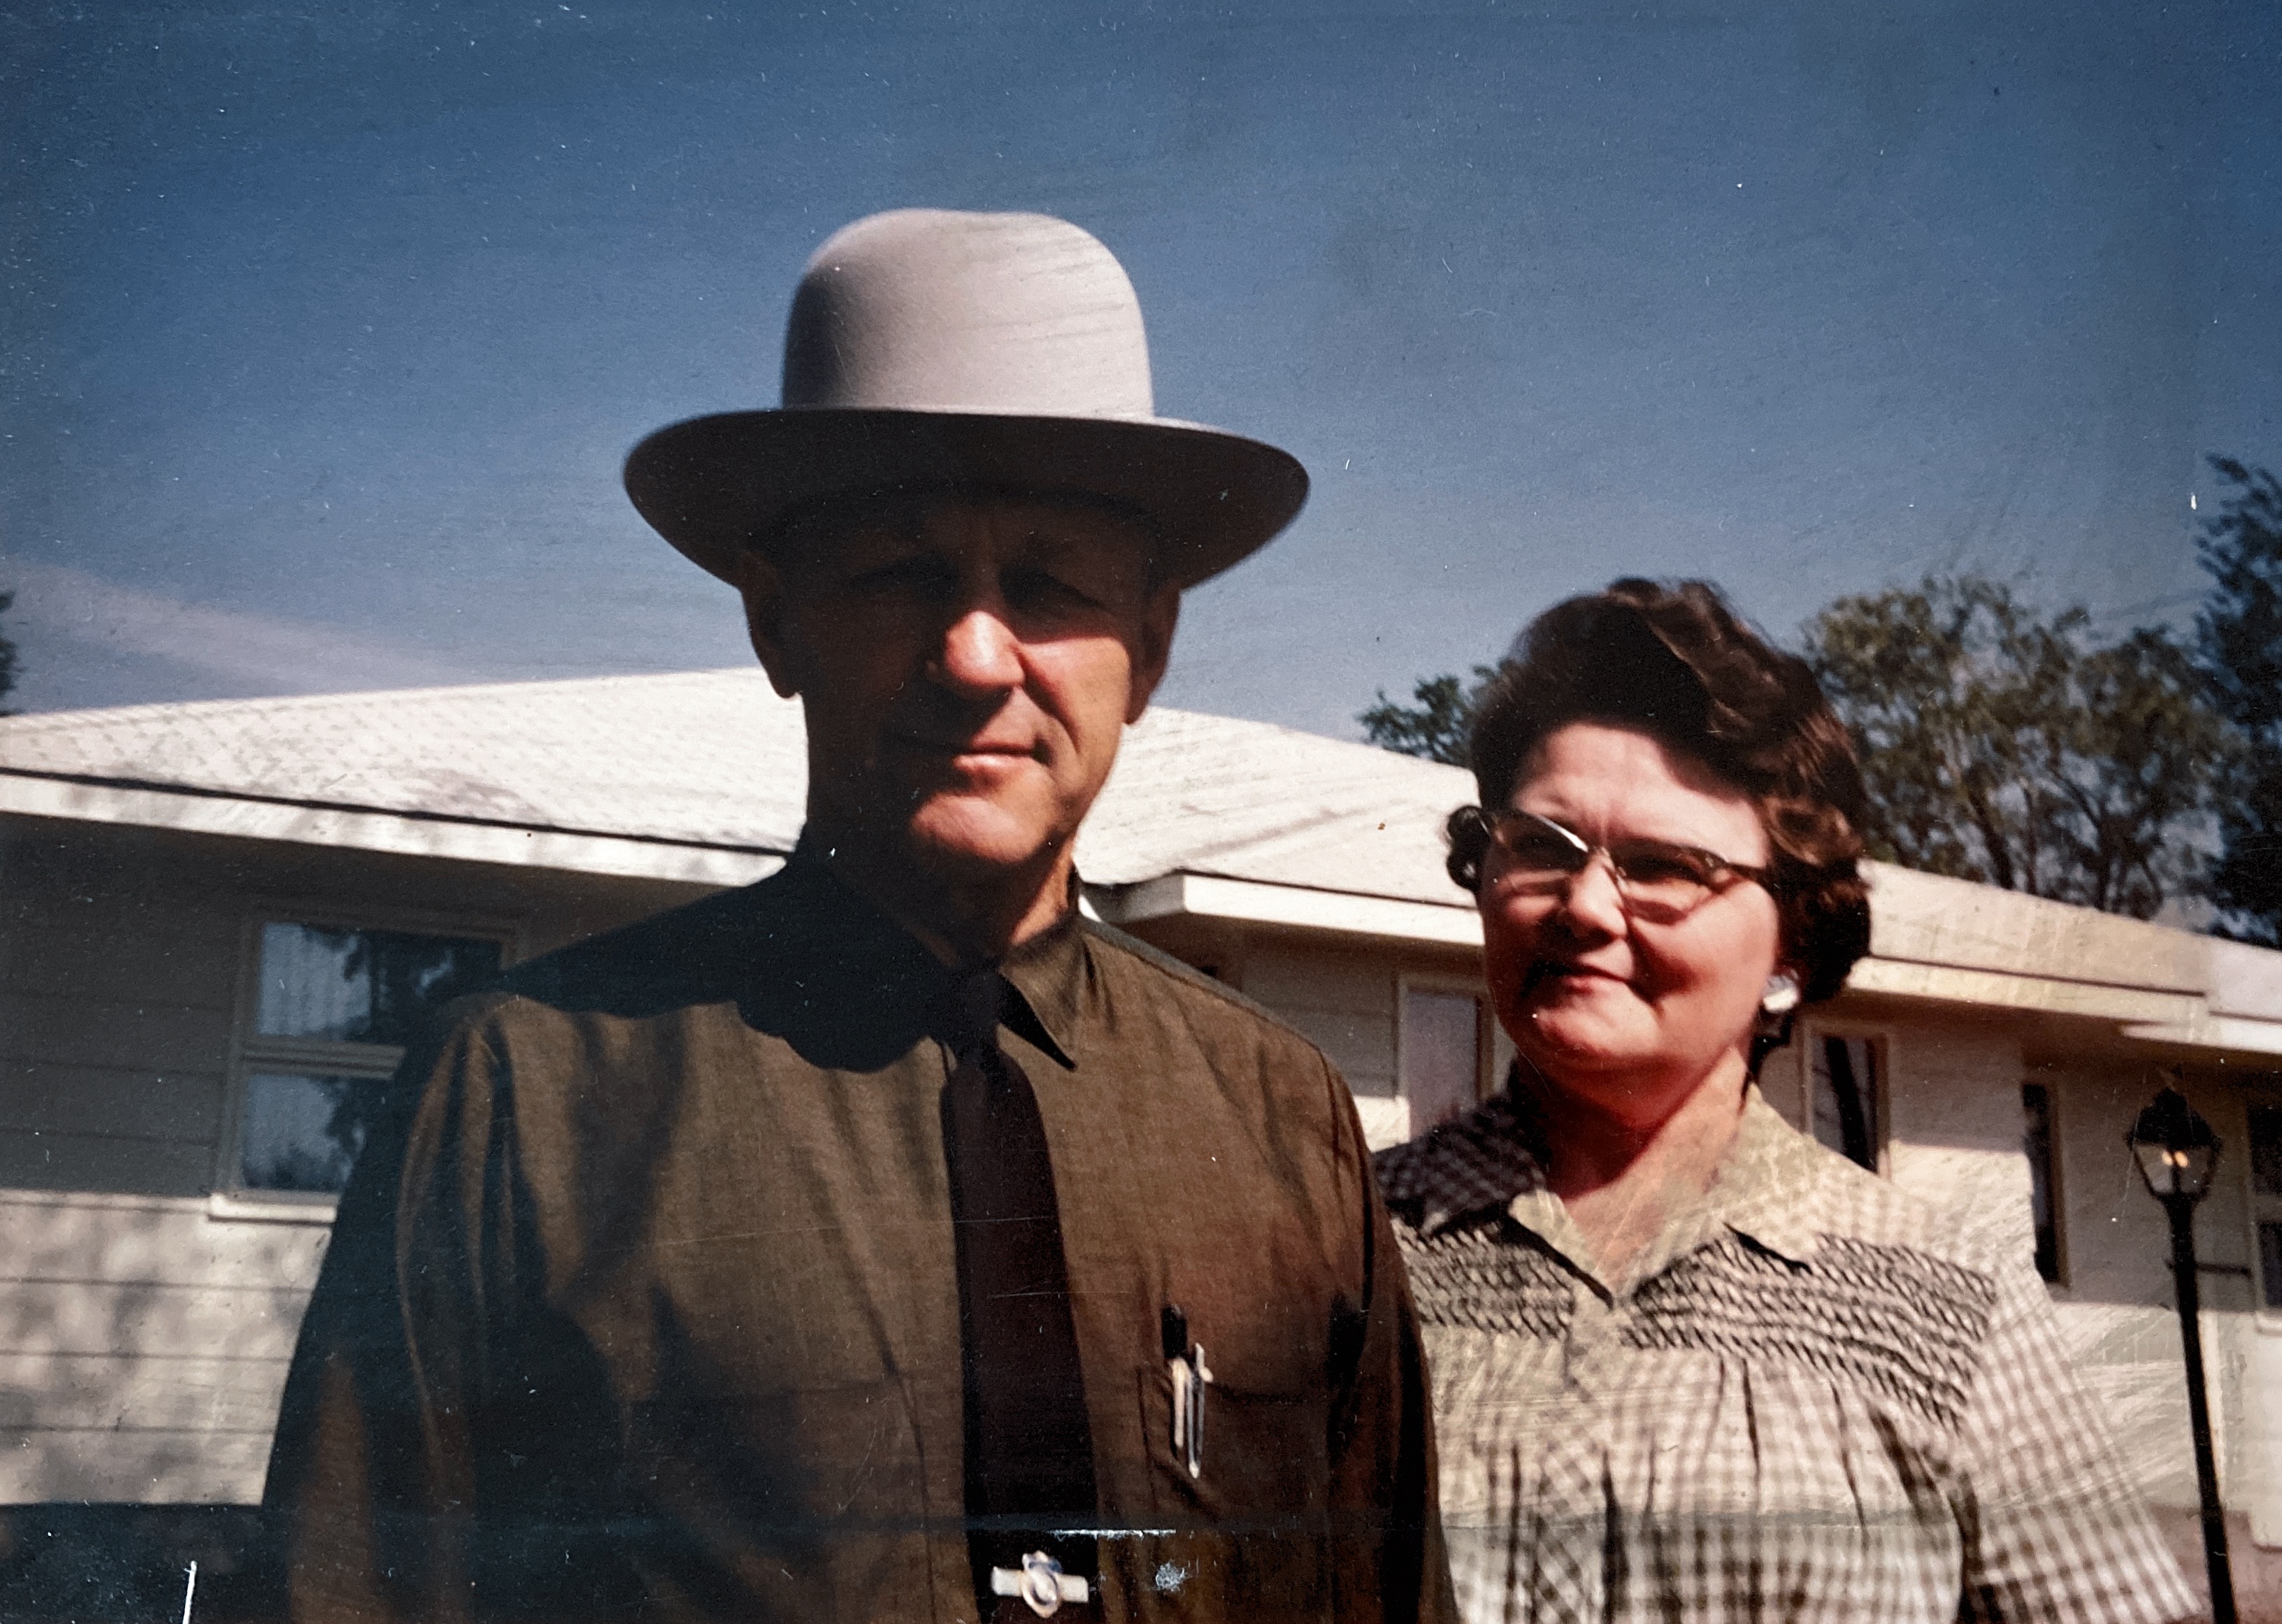 Ike and Dorothy Davey visiting us in Eau Claire, Wisconsin. Circa 1968. Taken in front of our duplex on Western Avenue.